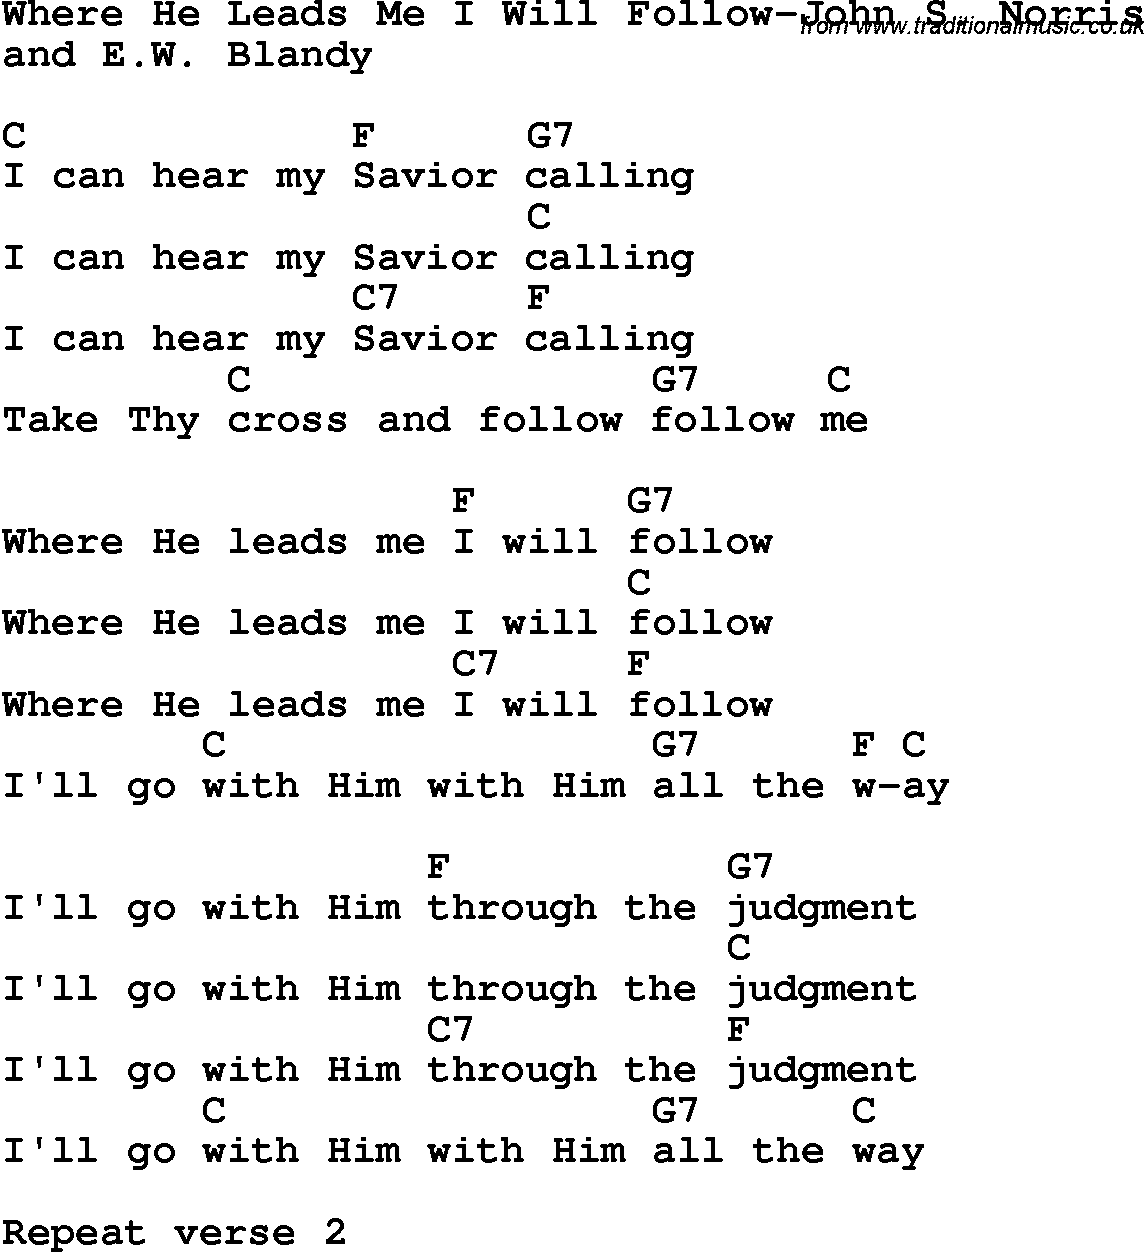 Country, Southern and Bluegrass Gospel Song Where He Leads Me I Will Follow-John S Norris lyrics and chords